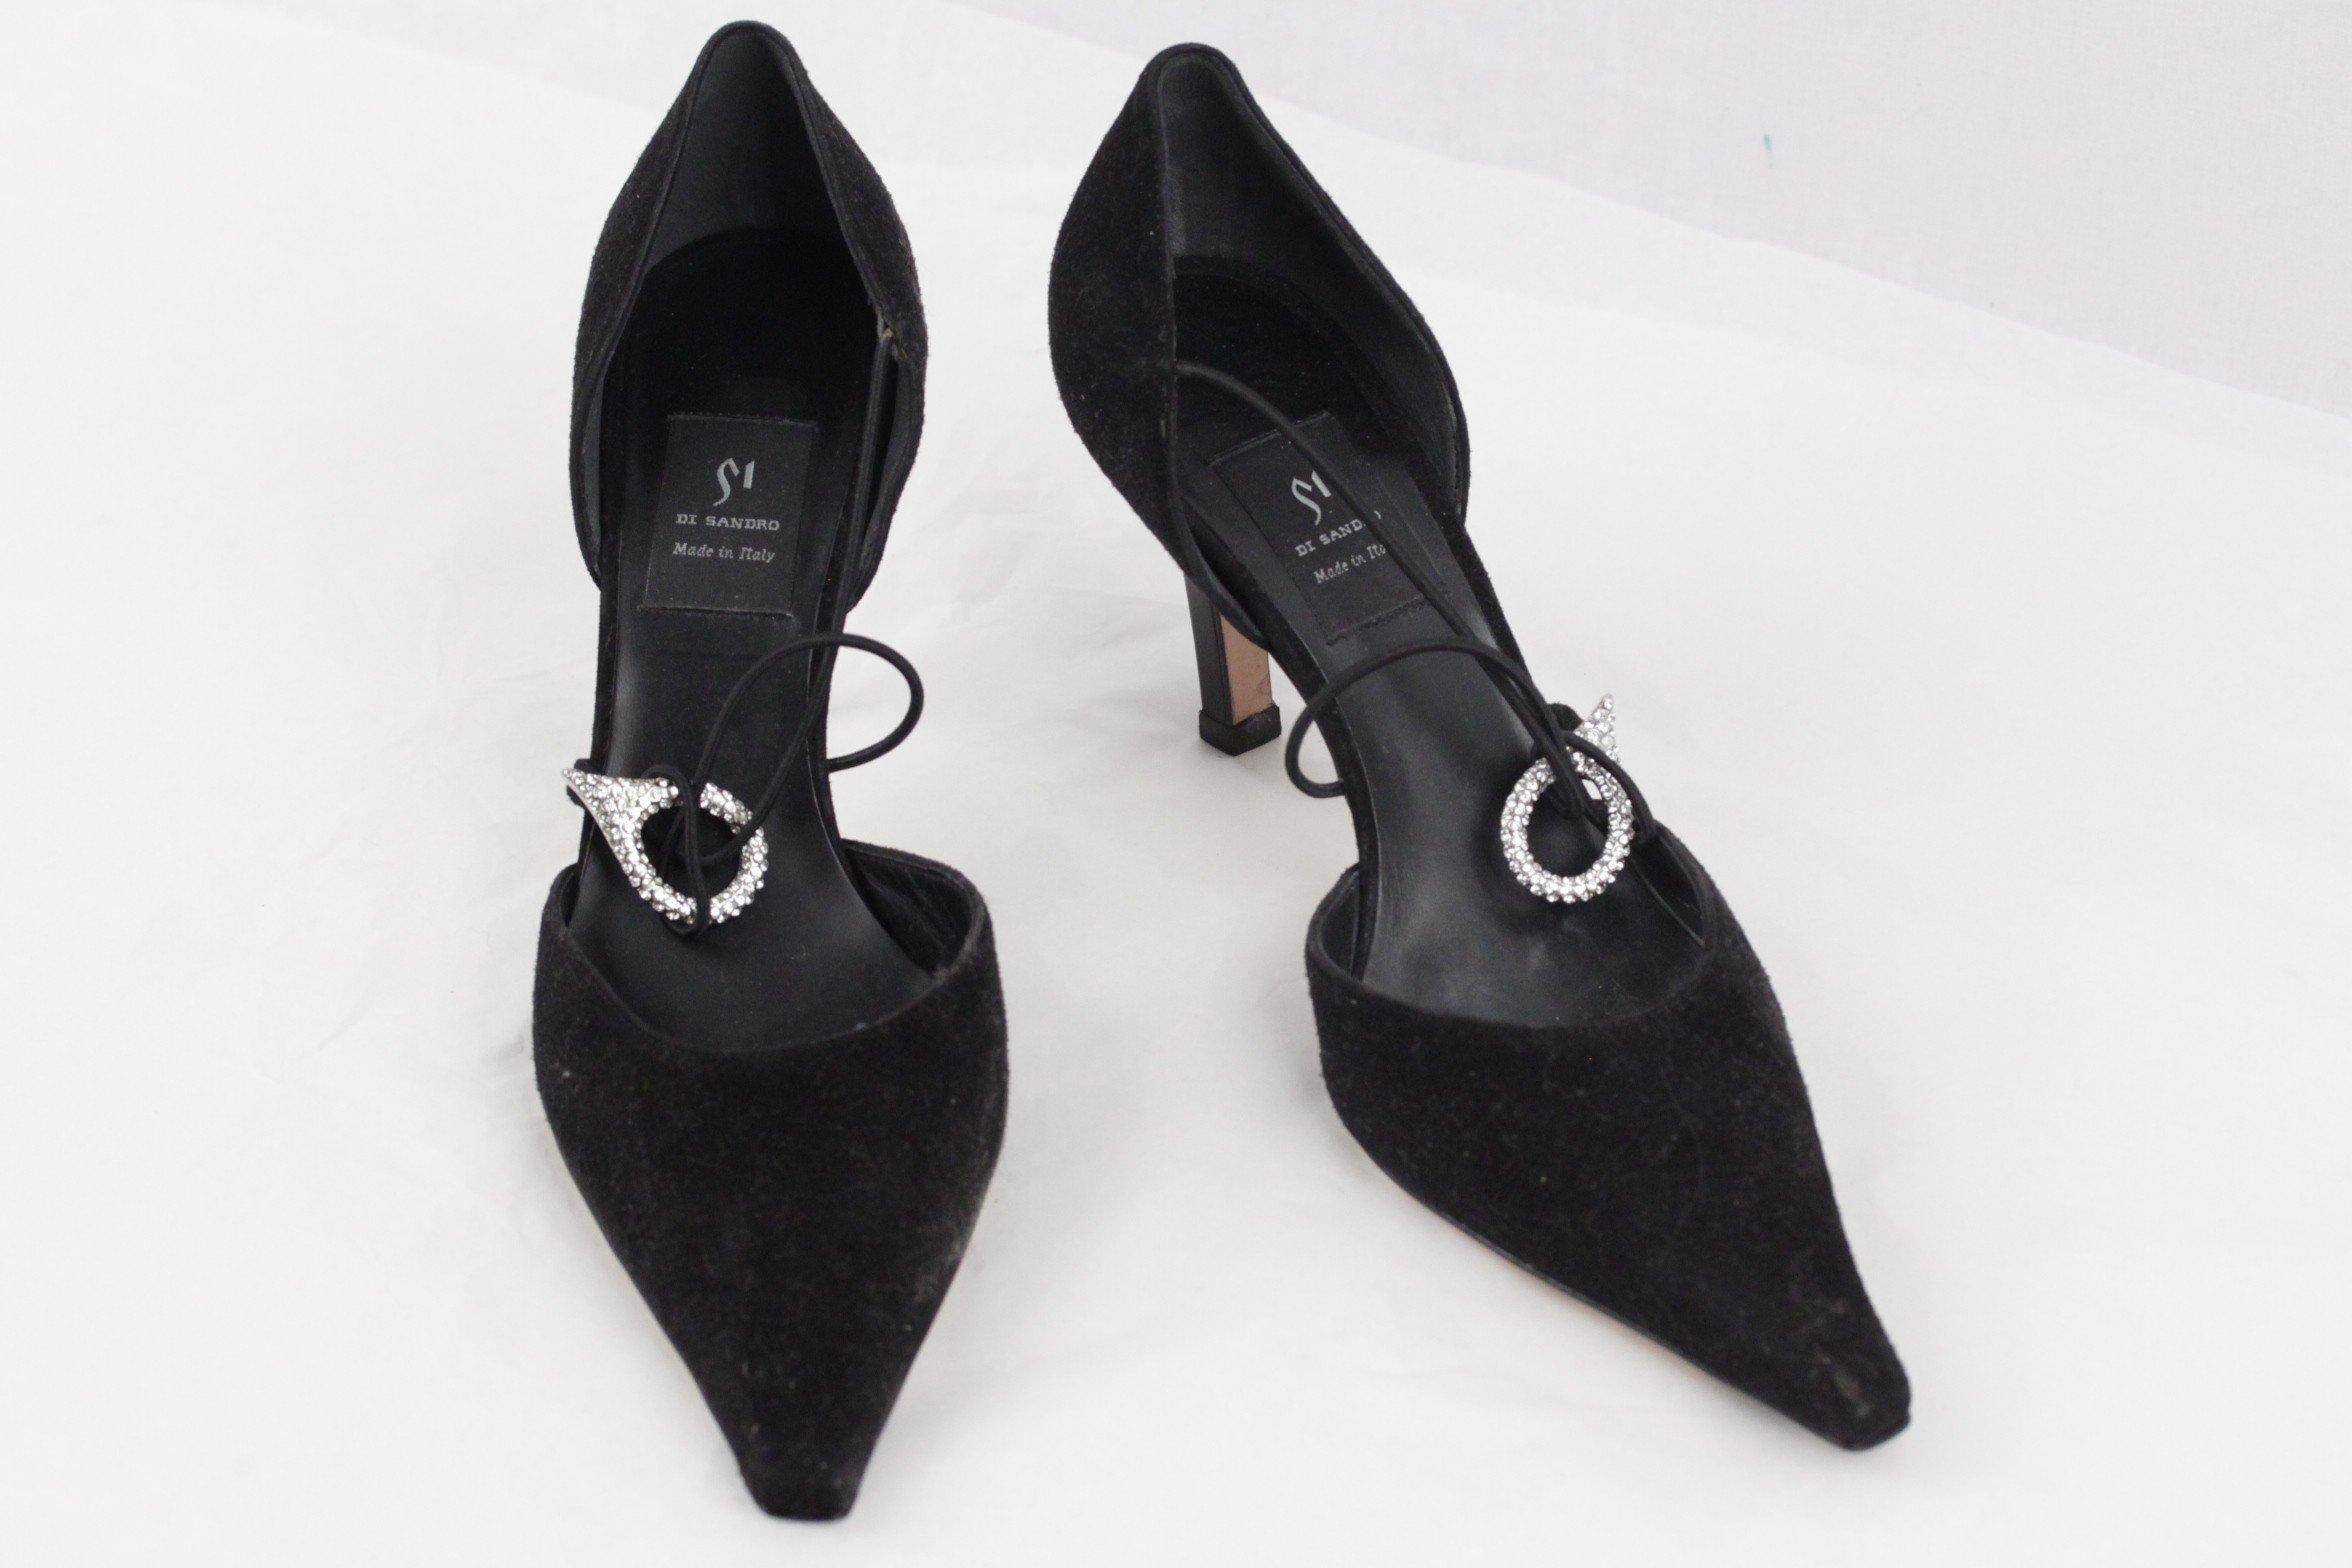 DI SANDRO Black D'ORSAY PUMPS Heels SHOES w/ Crystal Buckle SIZE 36.5 ...